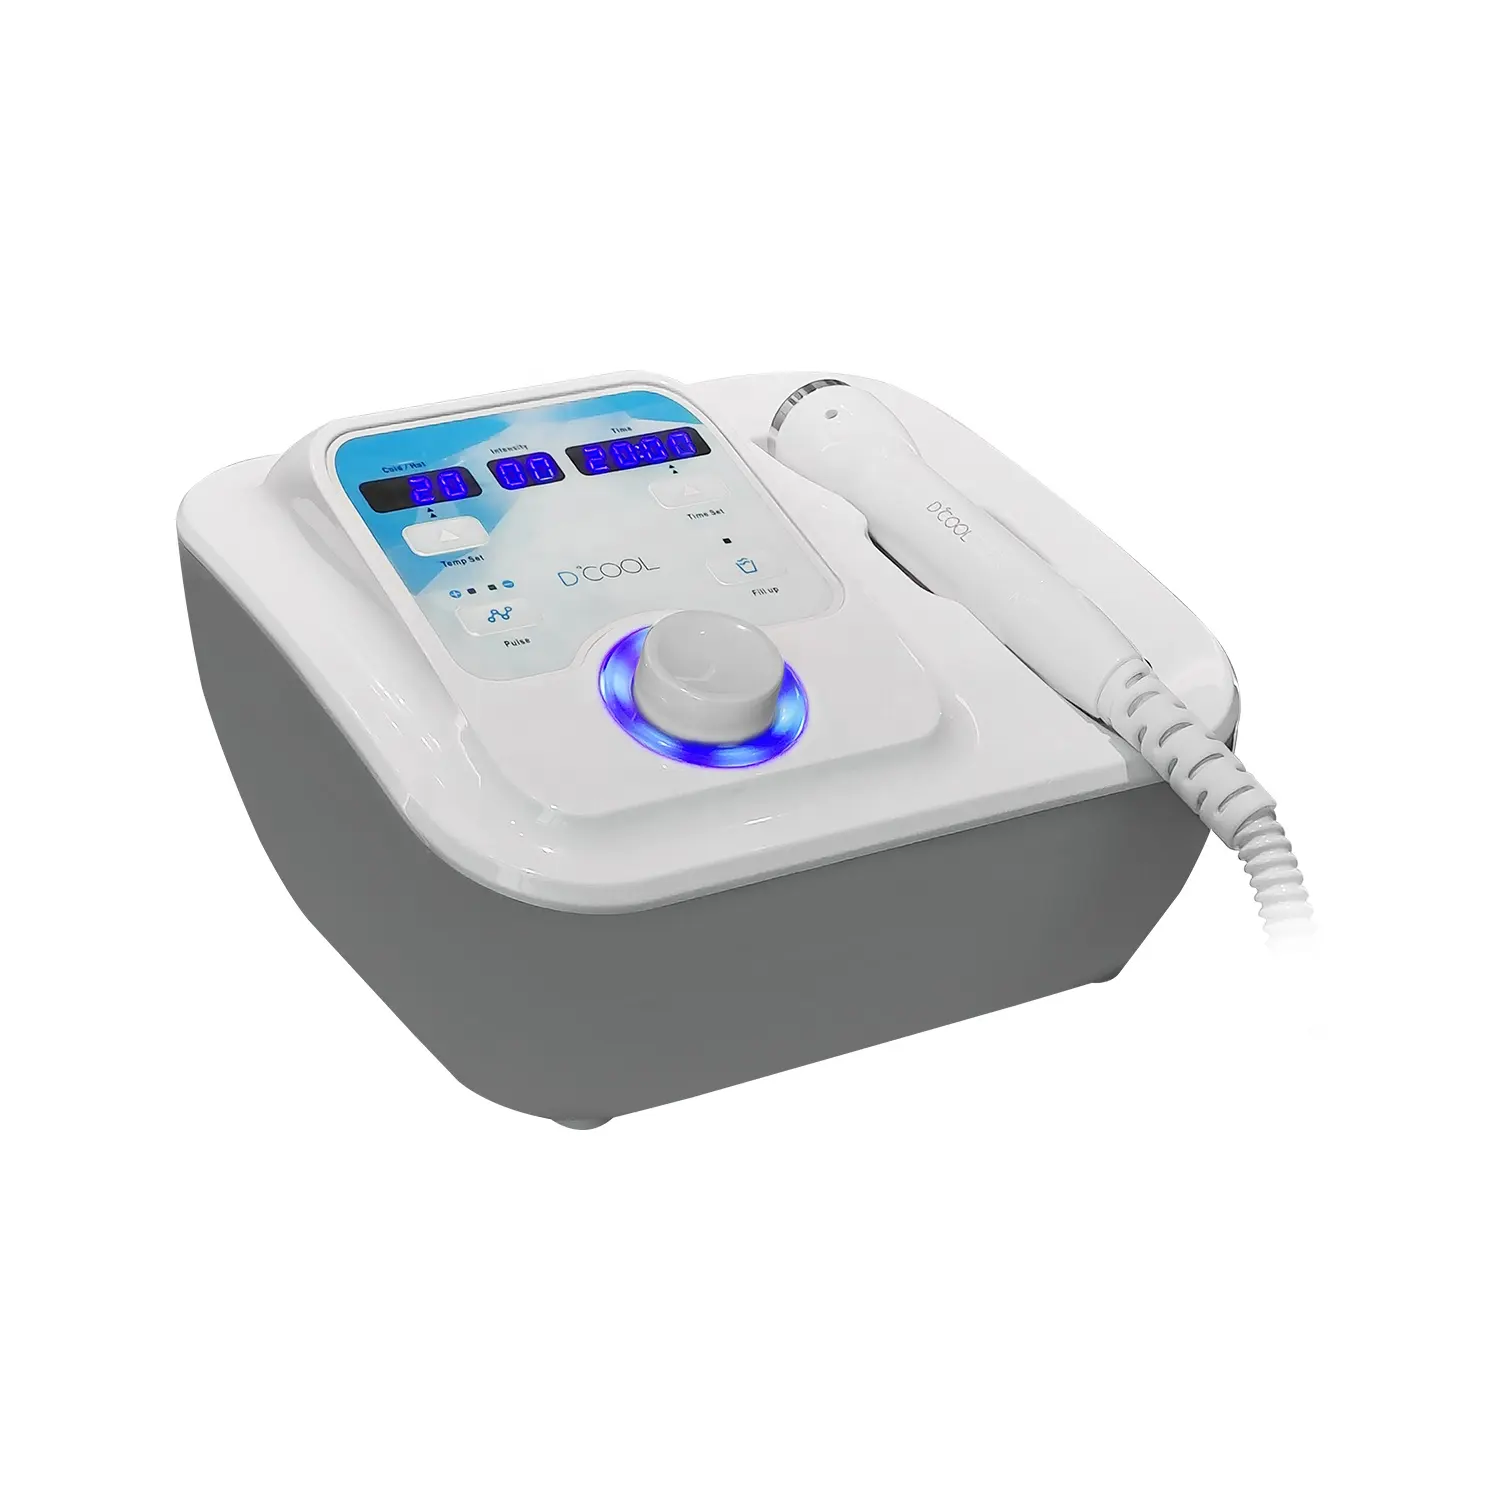 WEIYI D101 fast shipping Newest Dcool Cryo Cooling Heating System Cold and Hot Massage Facial Rejuvenation with Electroporation